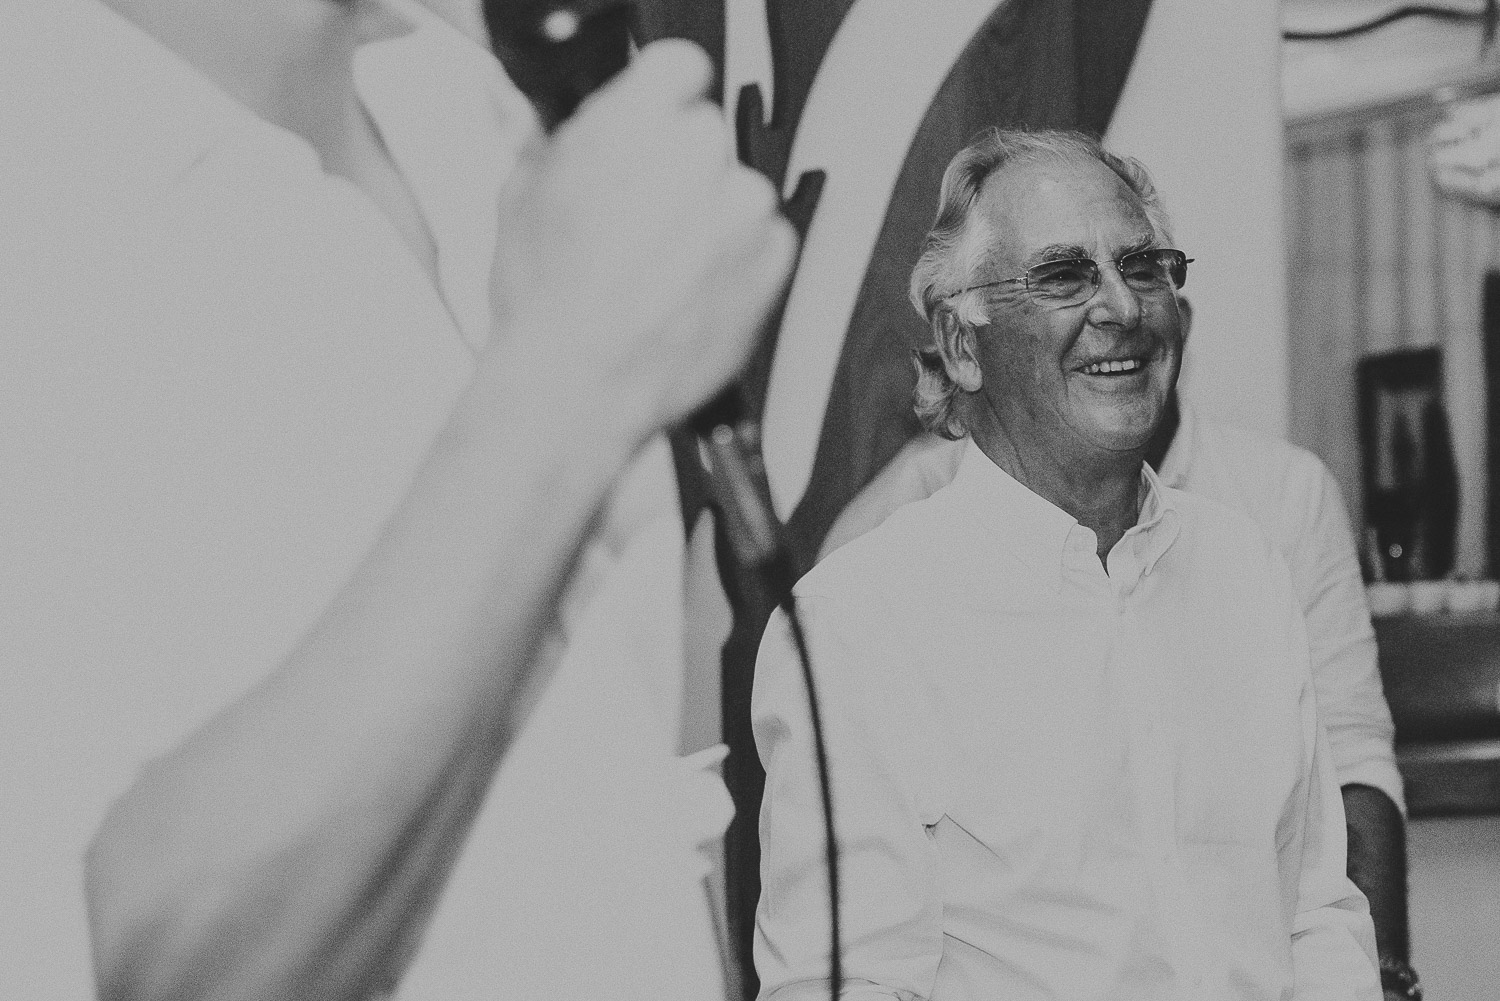 Wedding photographer Mykonos: black and white photo of the father of the bride laughing at Elia during Mykonos wedding speeches.